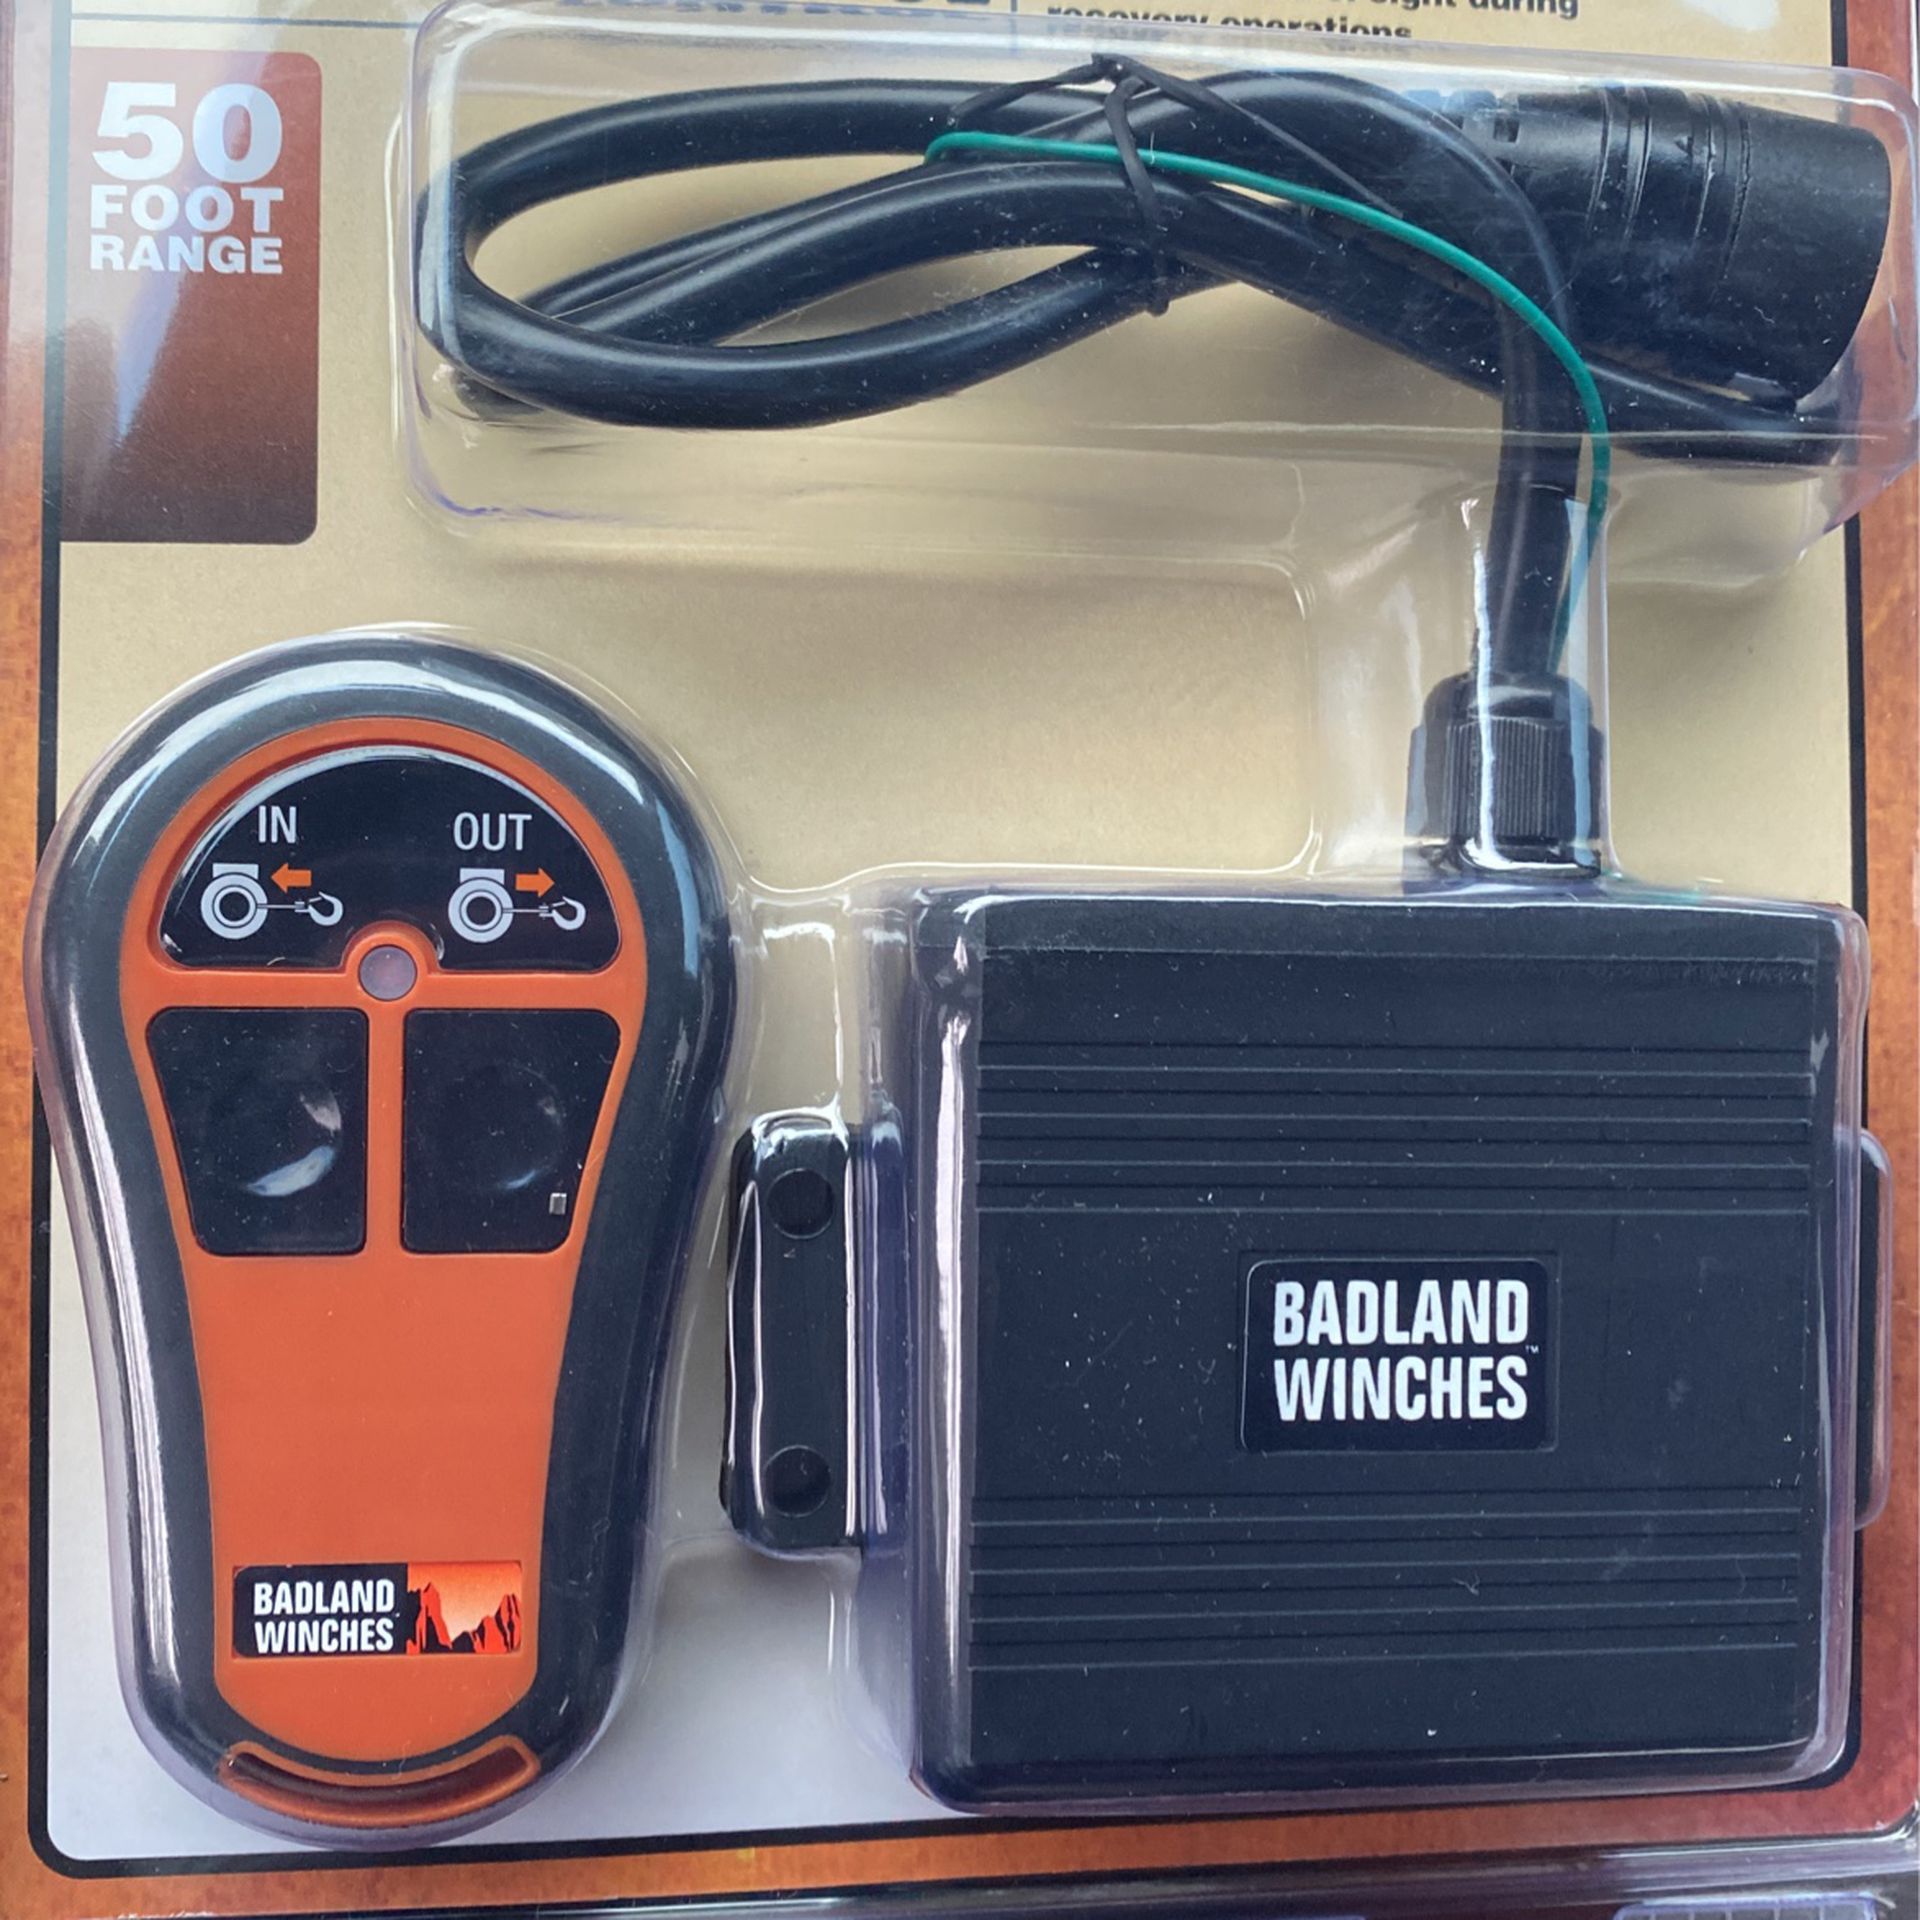 Badland Winches Wireless Winch Remote Control New in Package 